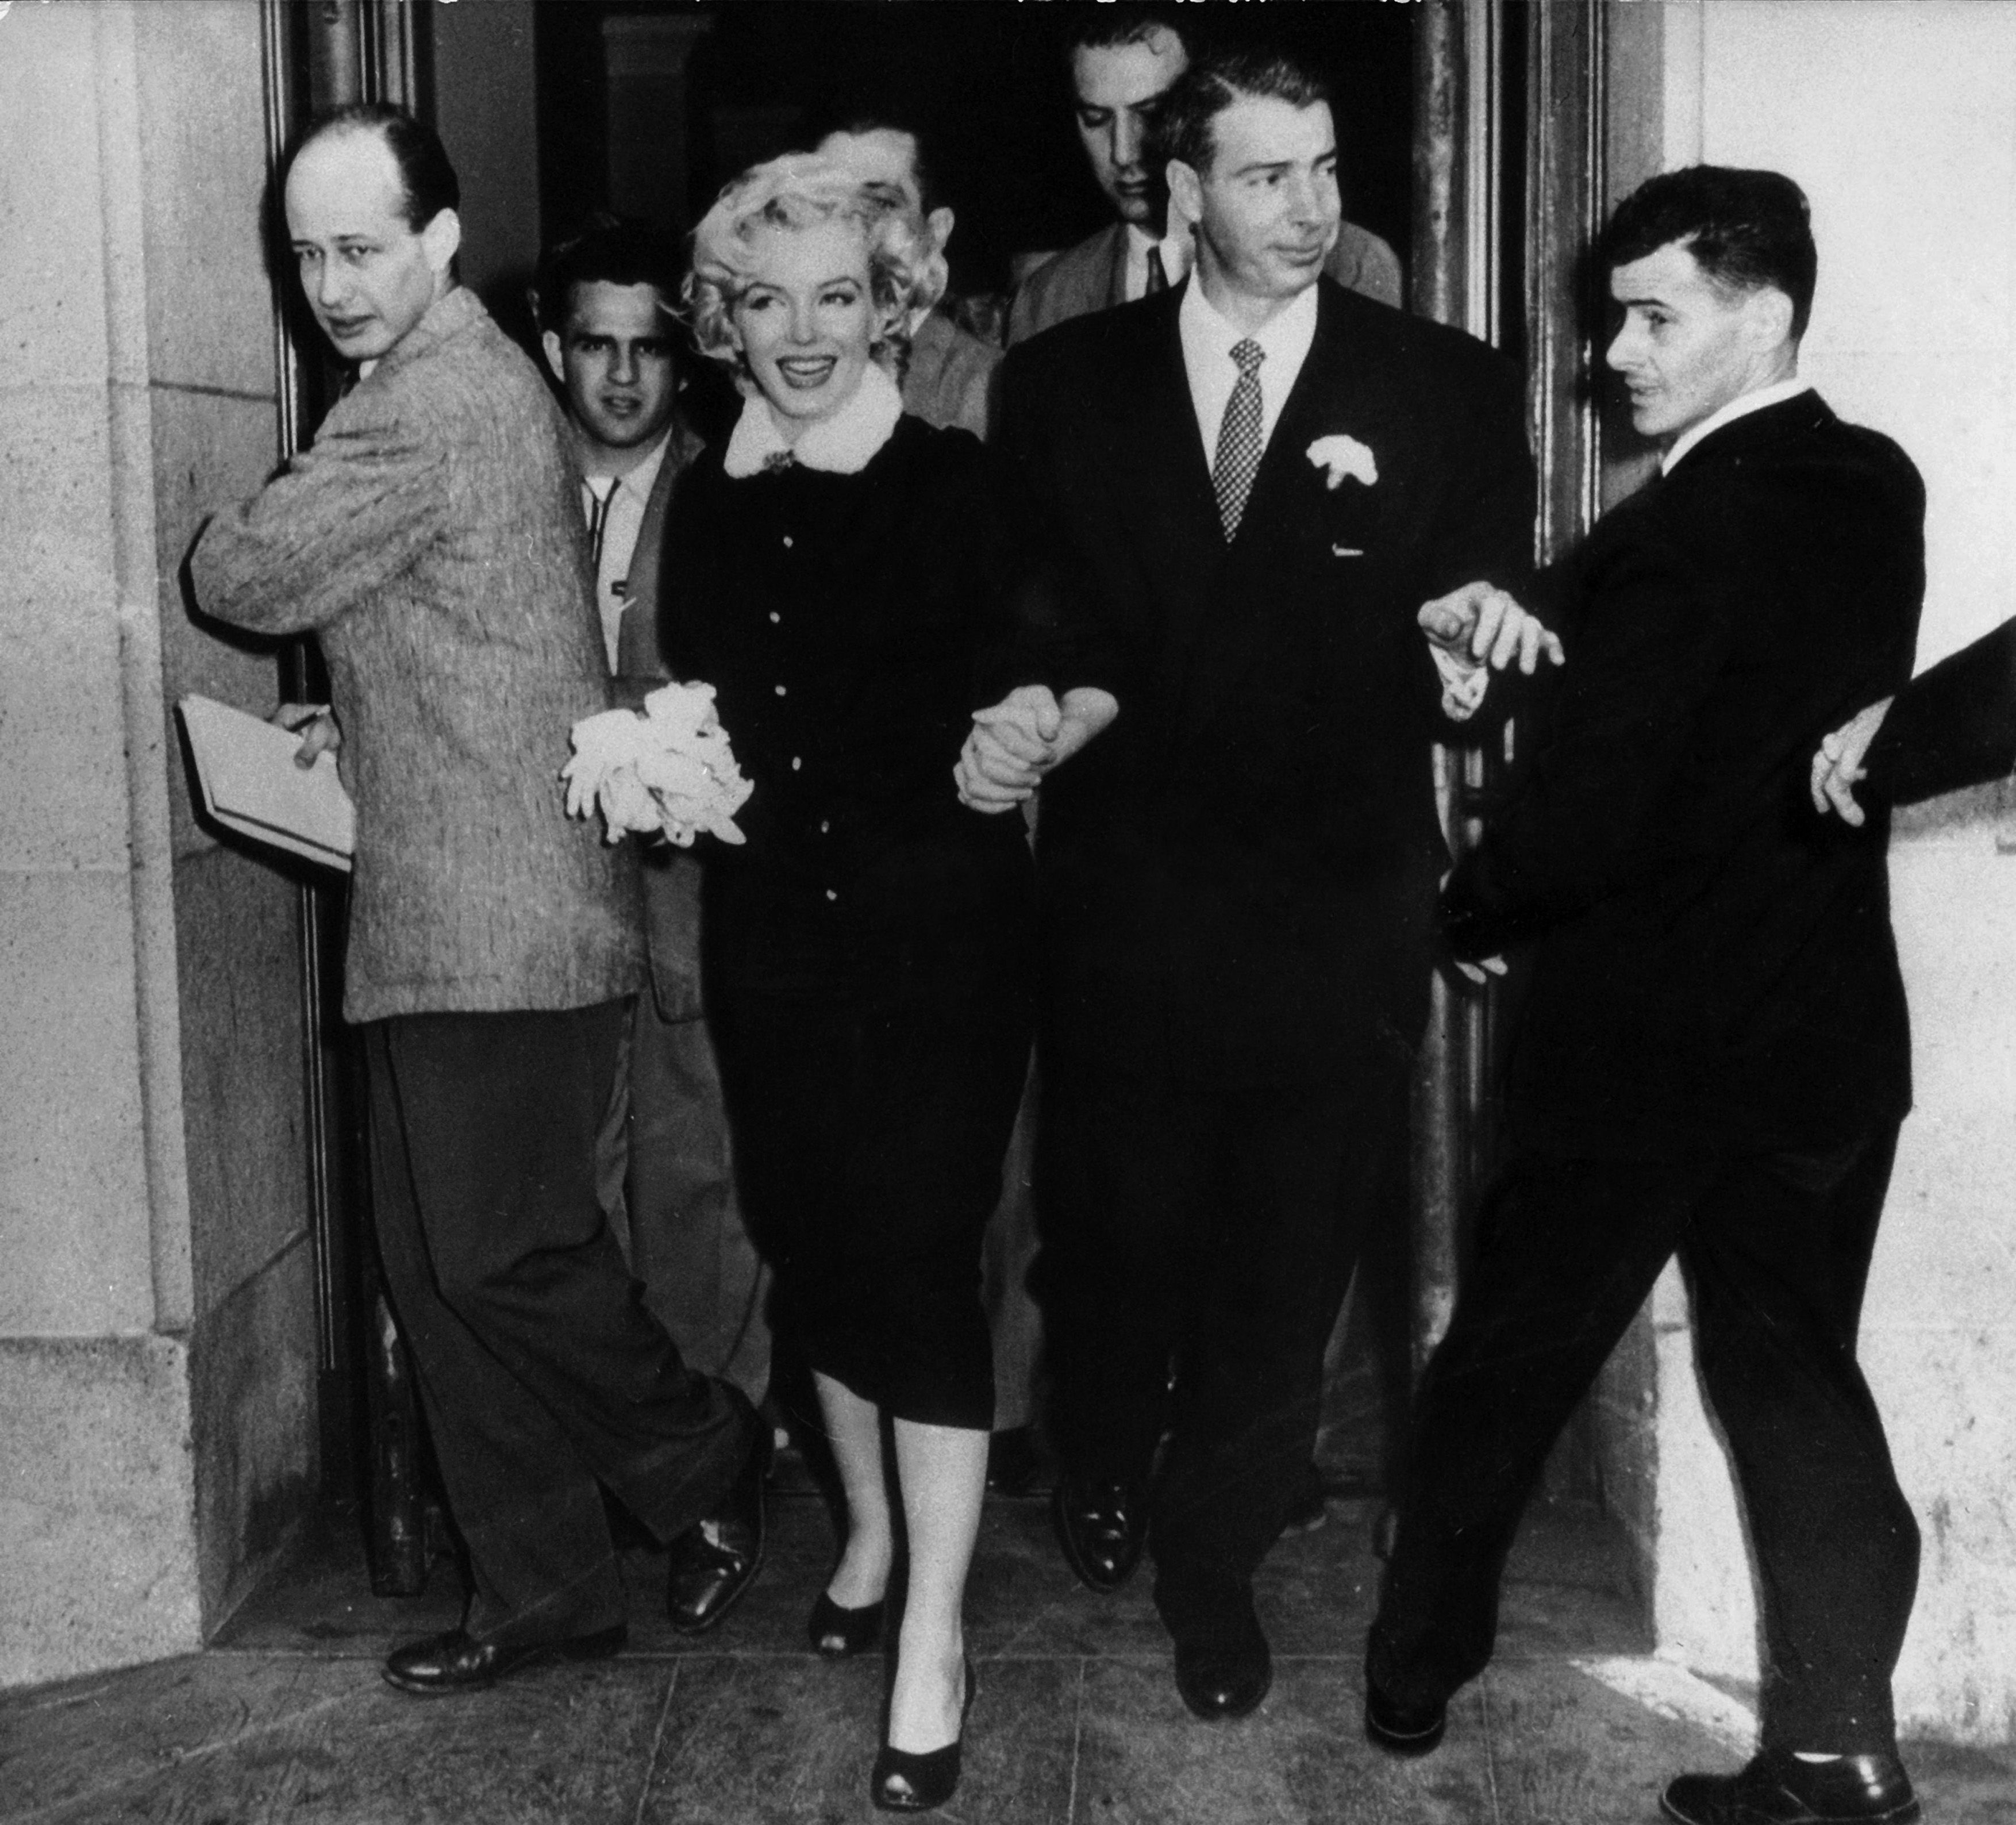 Joe DiMaggio and the Mysterious End of Marilyn Monroe